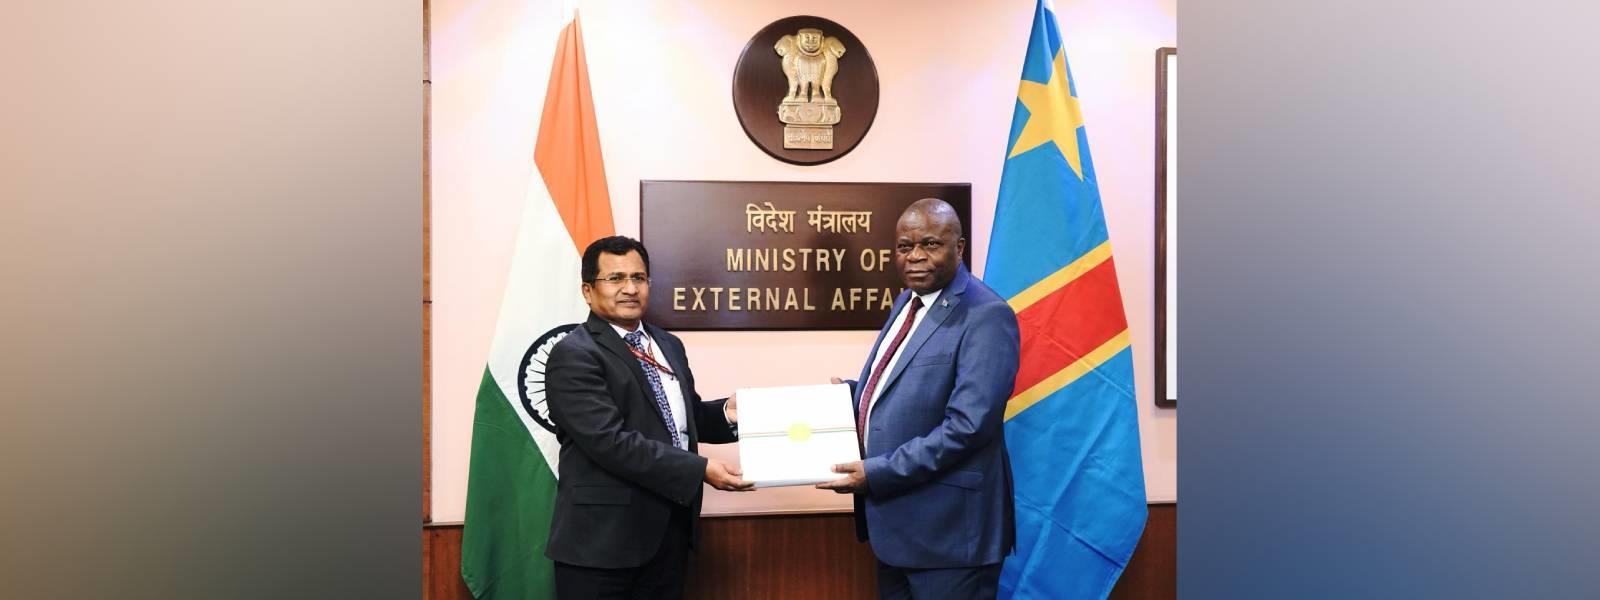 1st India-Democratic Republic of Congo Foreign Office Consultations held in New Delhi, co-chaired by Additional Secretary (Central and West Africa), Shri Sevala Naik Mude and H.E. Mr. Wabenga Kaleo Theo, Permanent Secretary, Ministry of Foreign Affairs and Francophonie of Democratic Republic of Congo